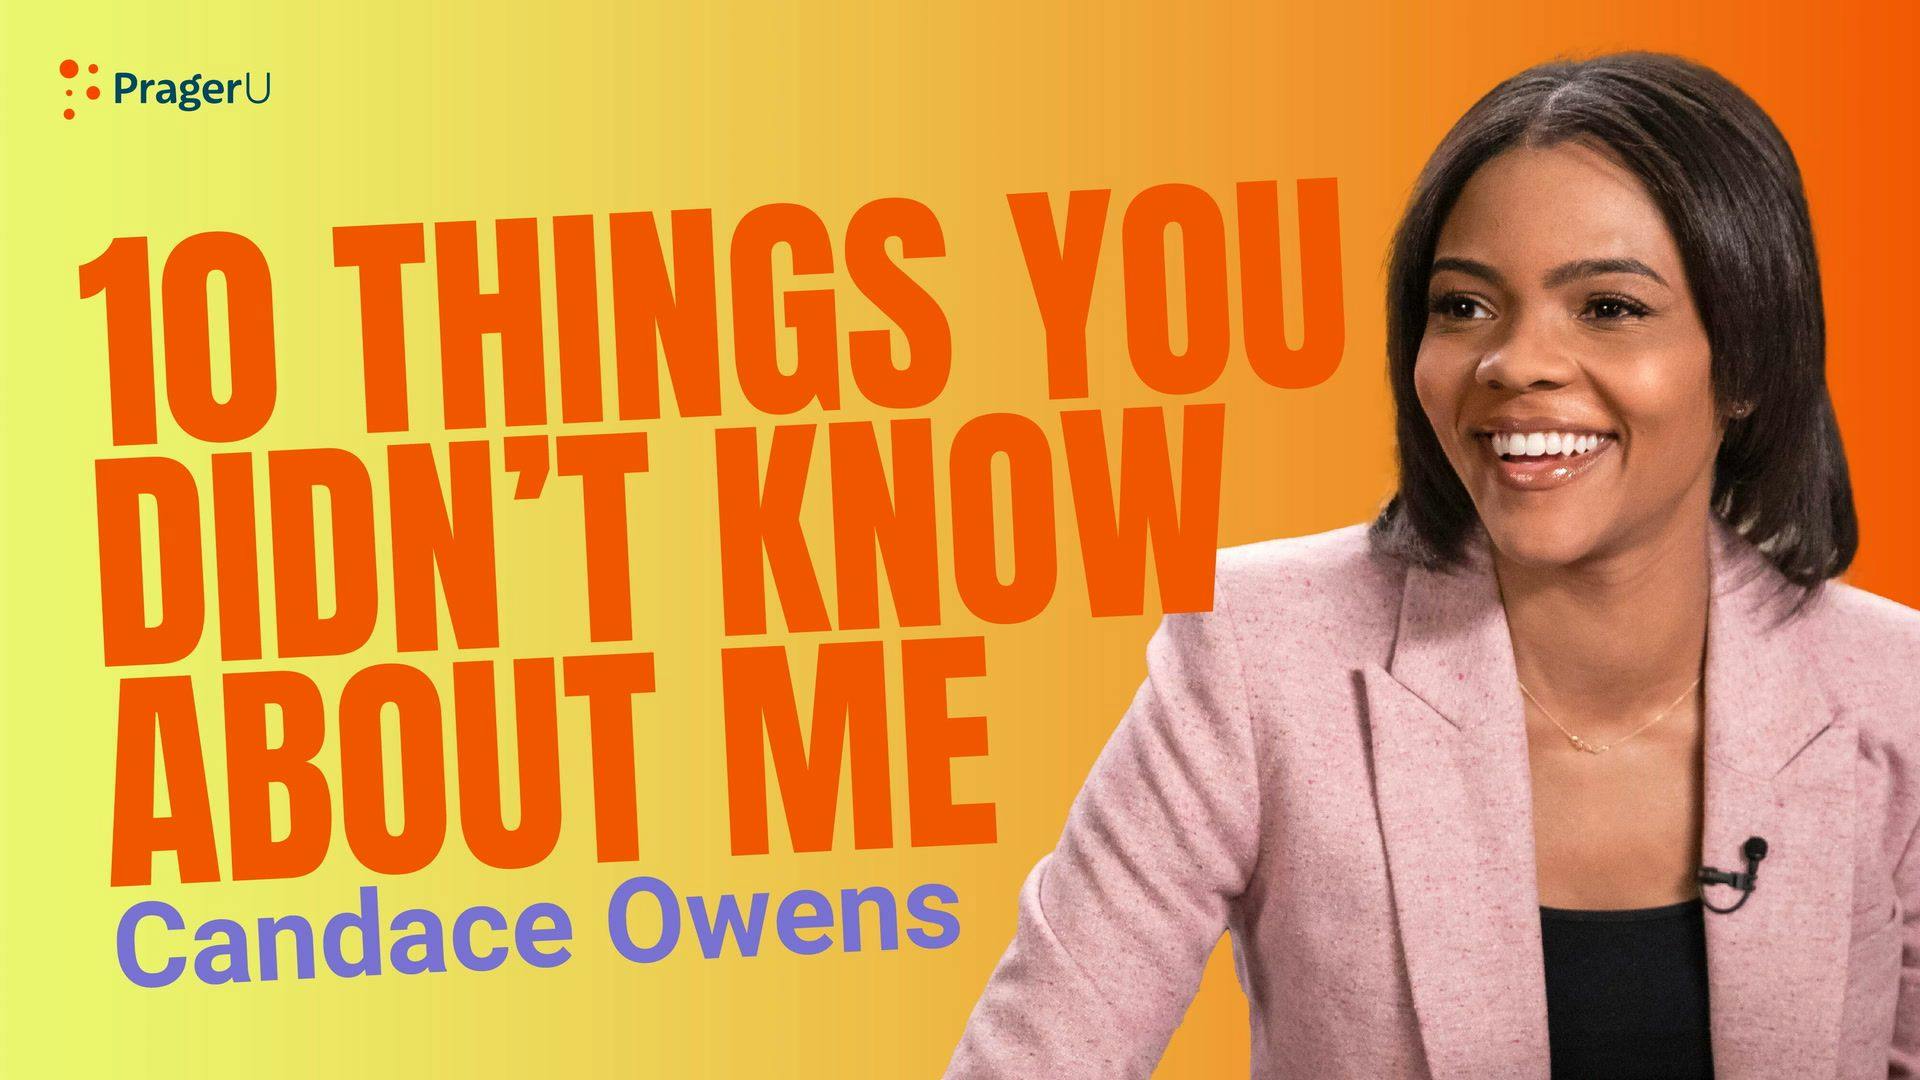 Candace Owens: 10 Things You Didn't Know About Me